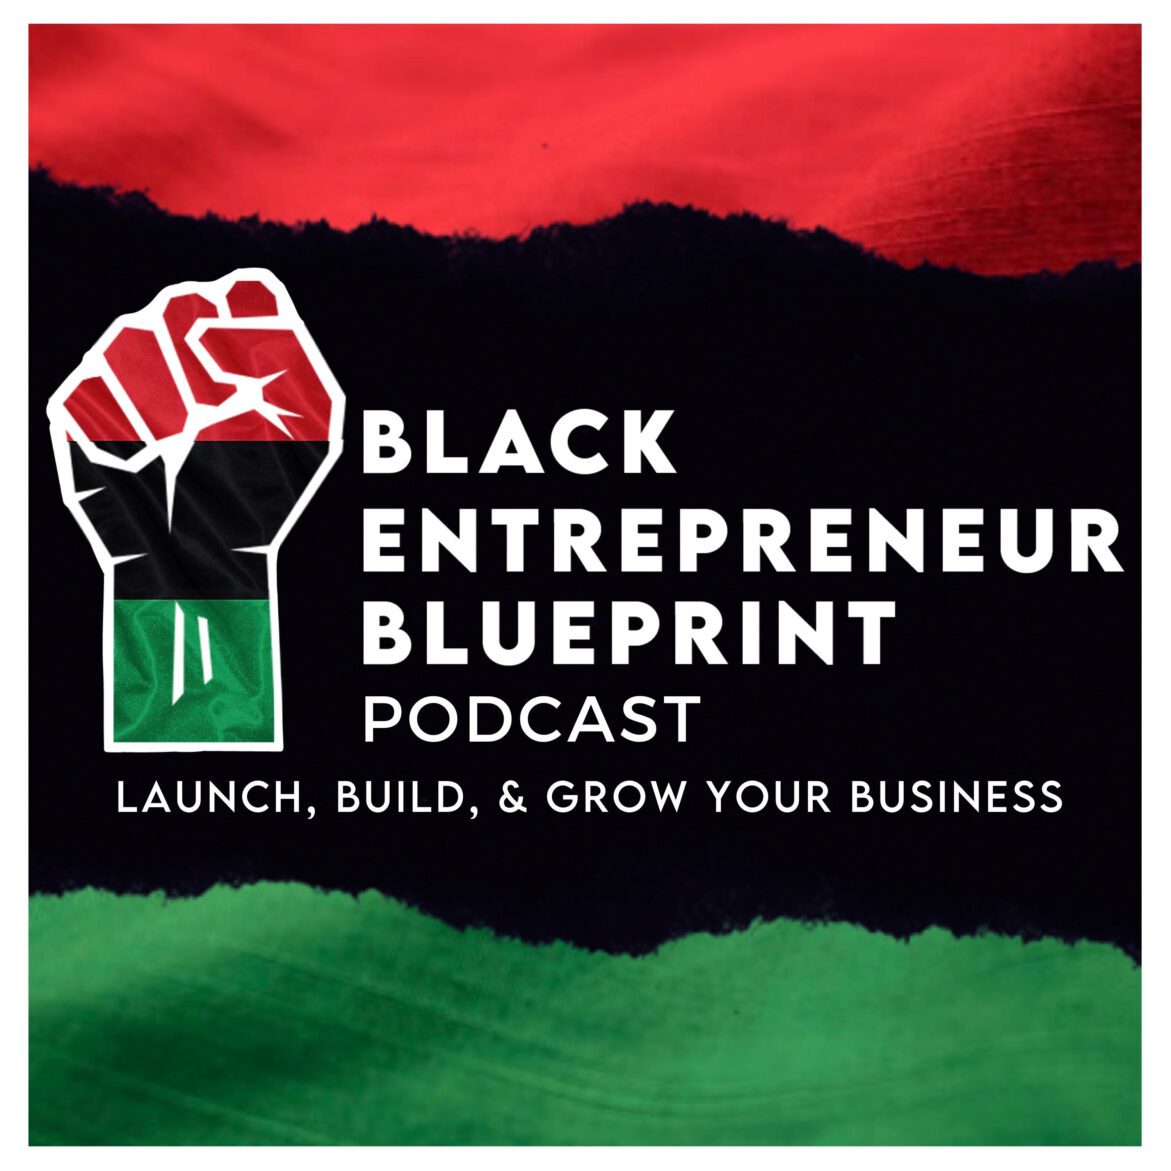 Black Podcasting - Black Entrepreneur Blueprint 451 - Jay Jones - The Number One Reason Why Most Entrepreneurs Are Not Successful